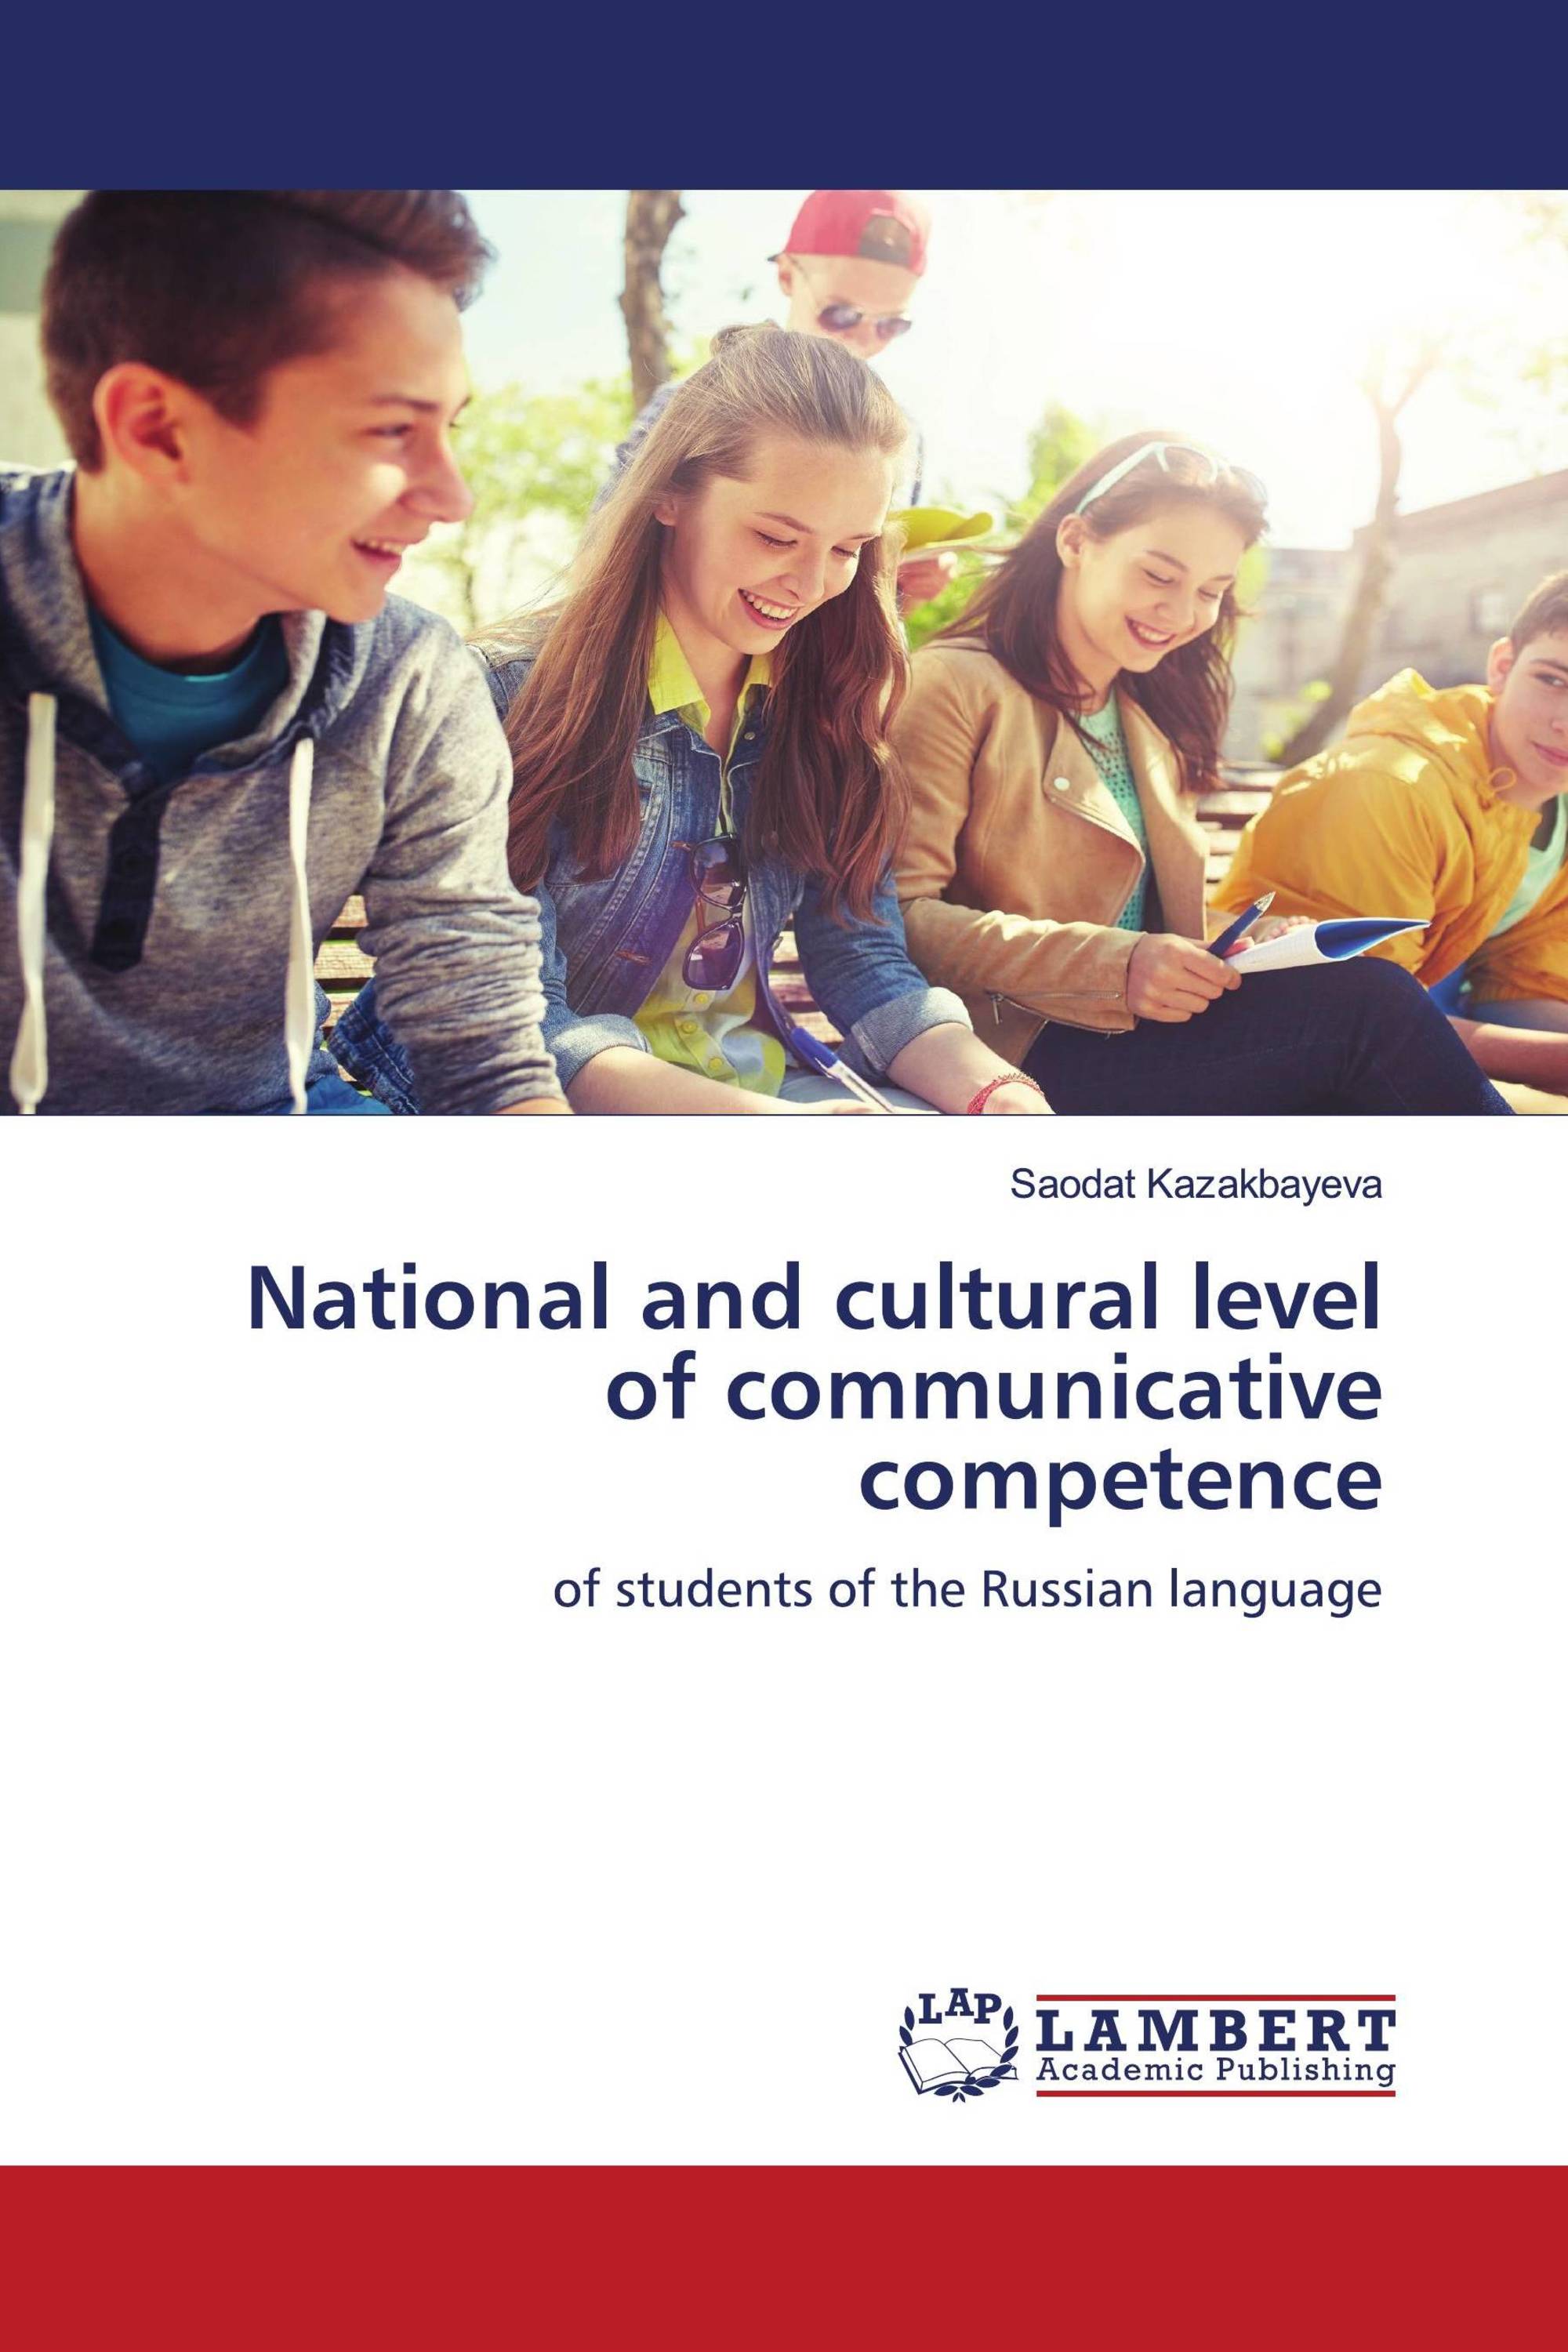 National and cultural level of communicative competence